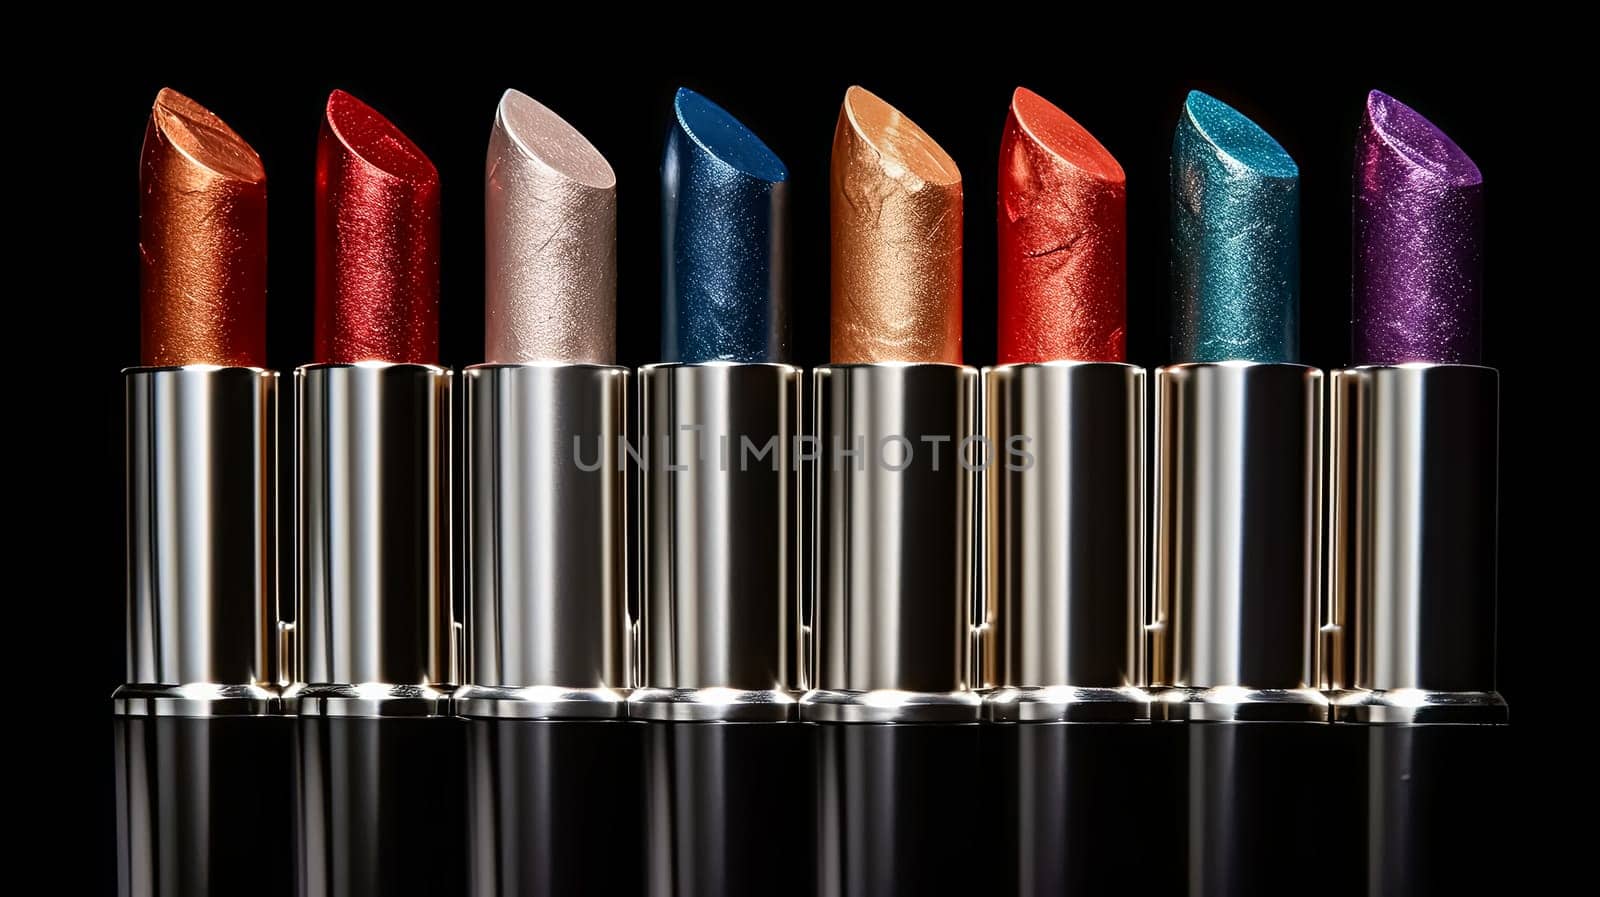 A row of lipsticks with glittery colors. The lipsticks are arranged in a row, with the first one being red and the last one being gold